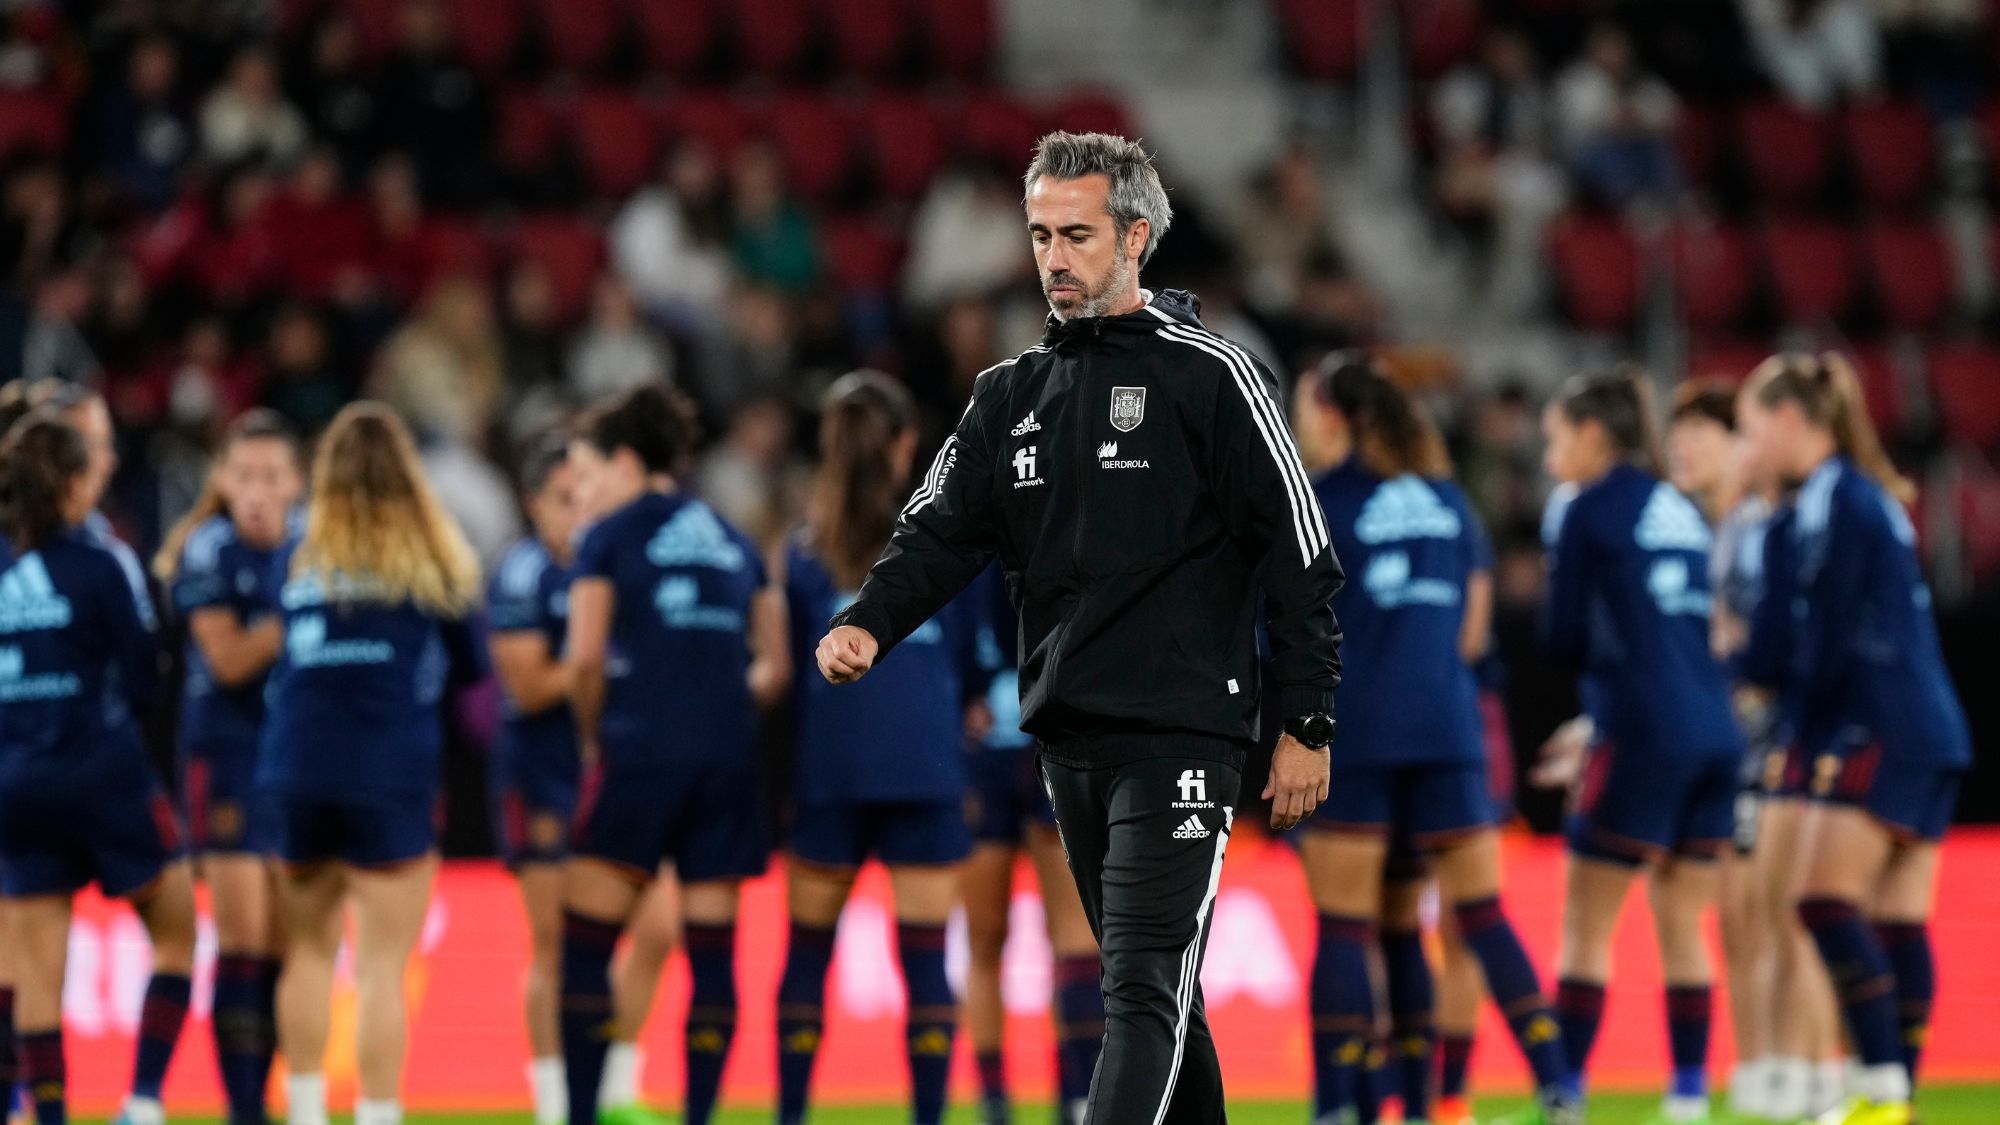 Spanish Women's football coach Jorge Vilda and the national team at the Women's World Cup